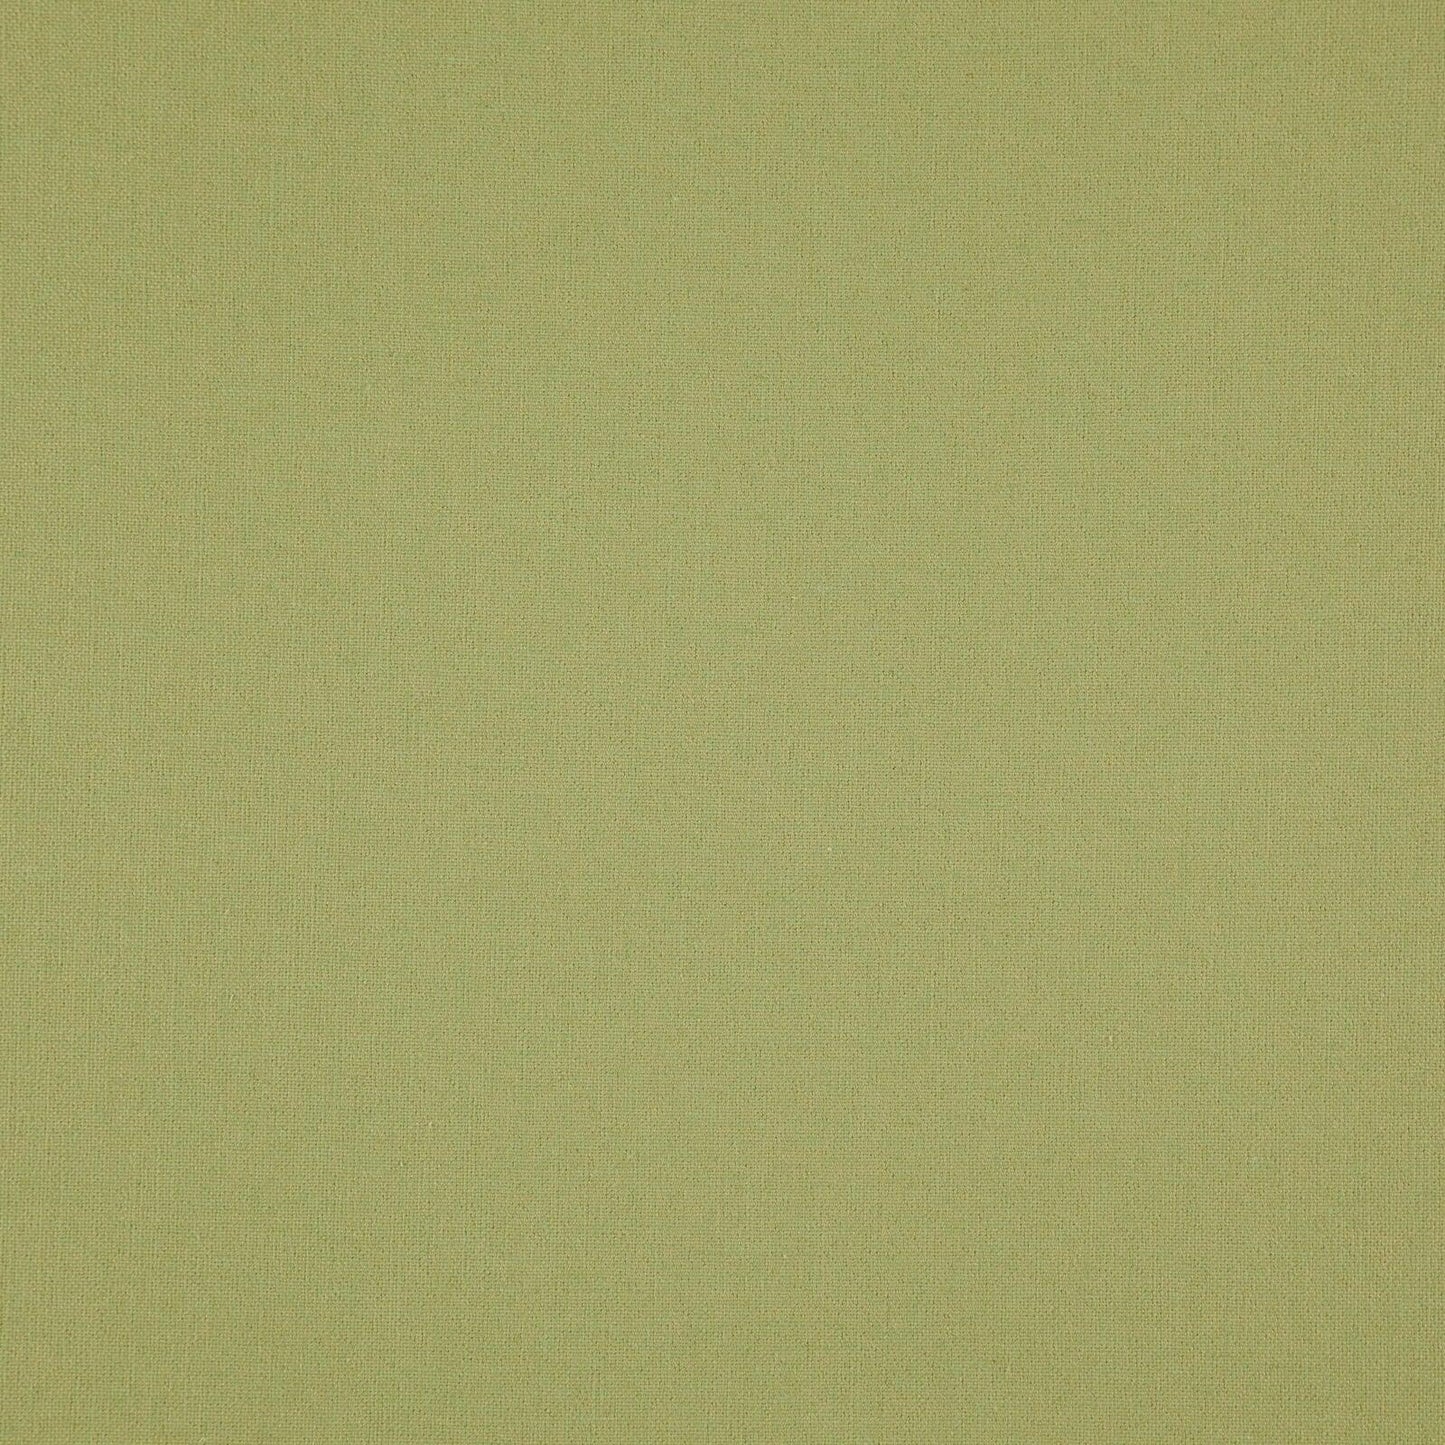 Linen Upholstery Fabric Spark Pale Chartreuse